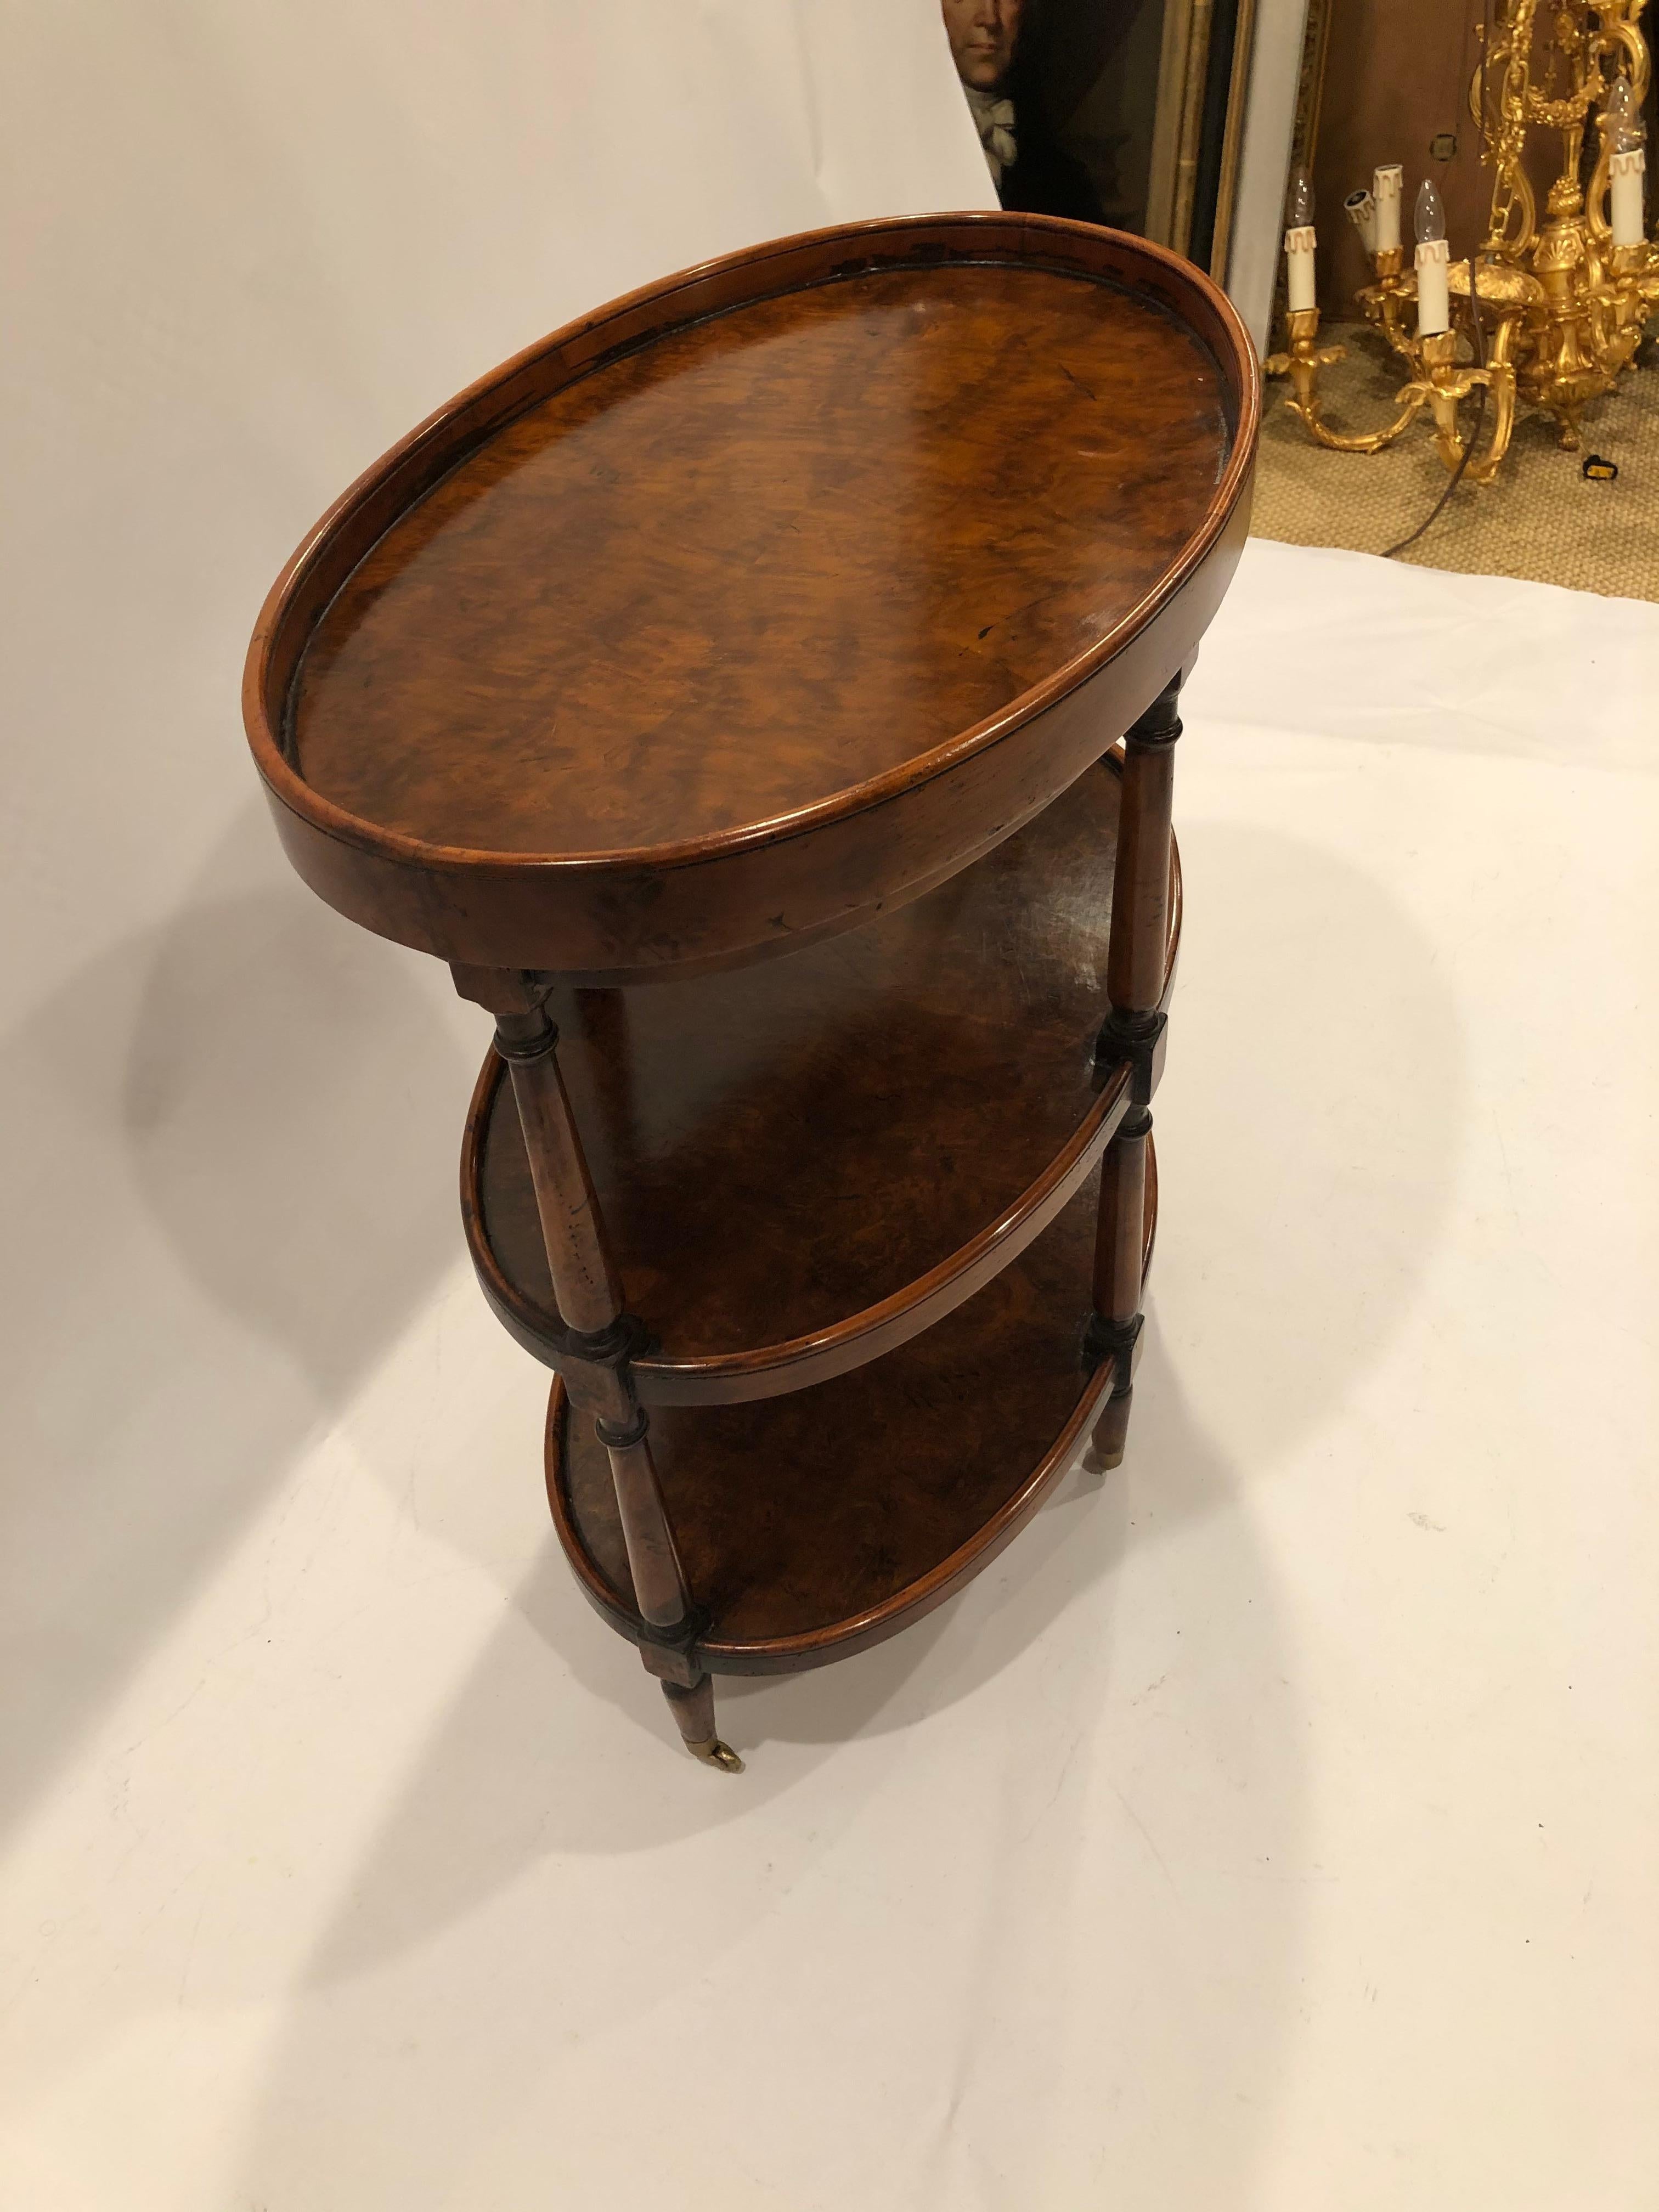 Handsome very versatile oval 3 tier side table with beautiful bookmatched burl wood and brass casters.